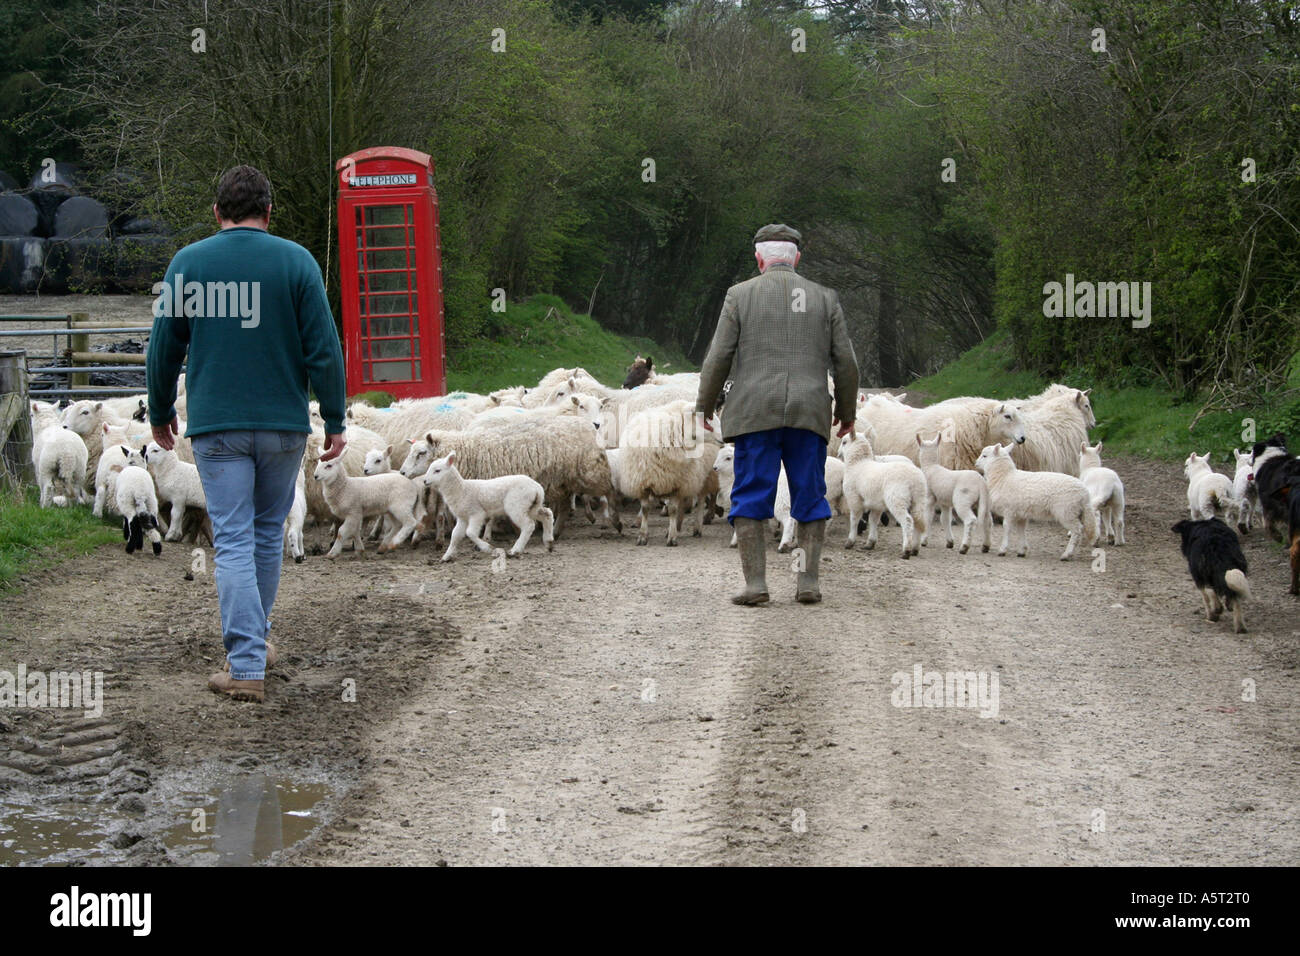 Two farmers and border collie sheep dogs rounding up a flock of sheep and spring lambs. Red telephone box. Farm in Wales. UK. Stock Photo